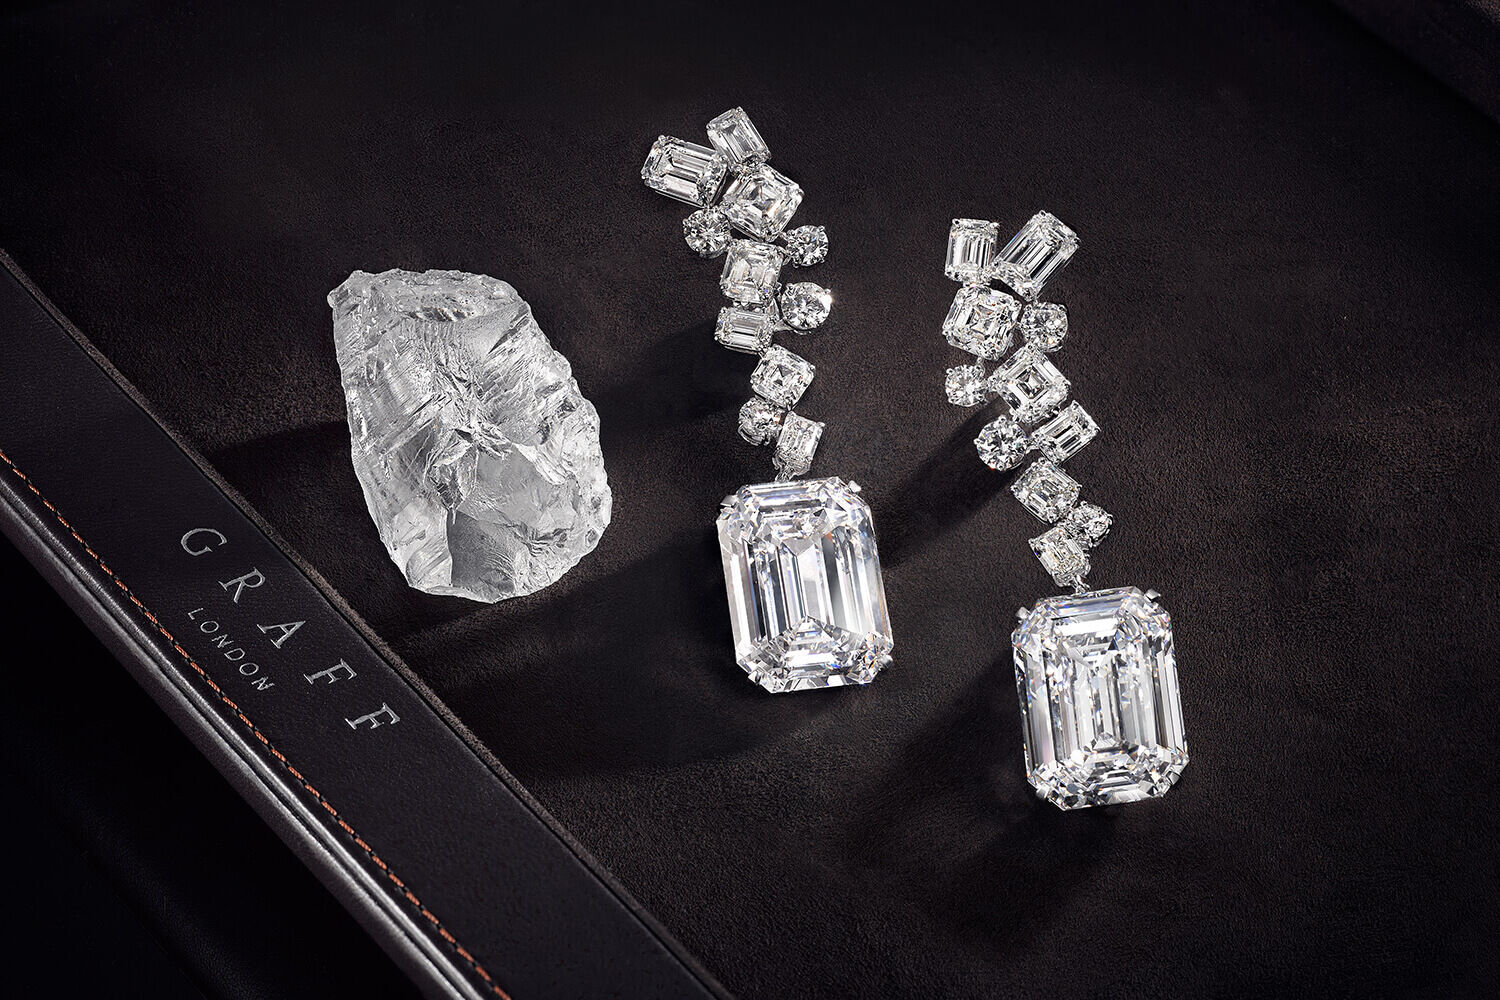 The Graff Eternal Twins - two identical D Flawless emerald cut diamonds weighing 50.23 carats each and the rough stone